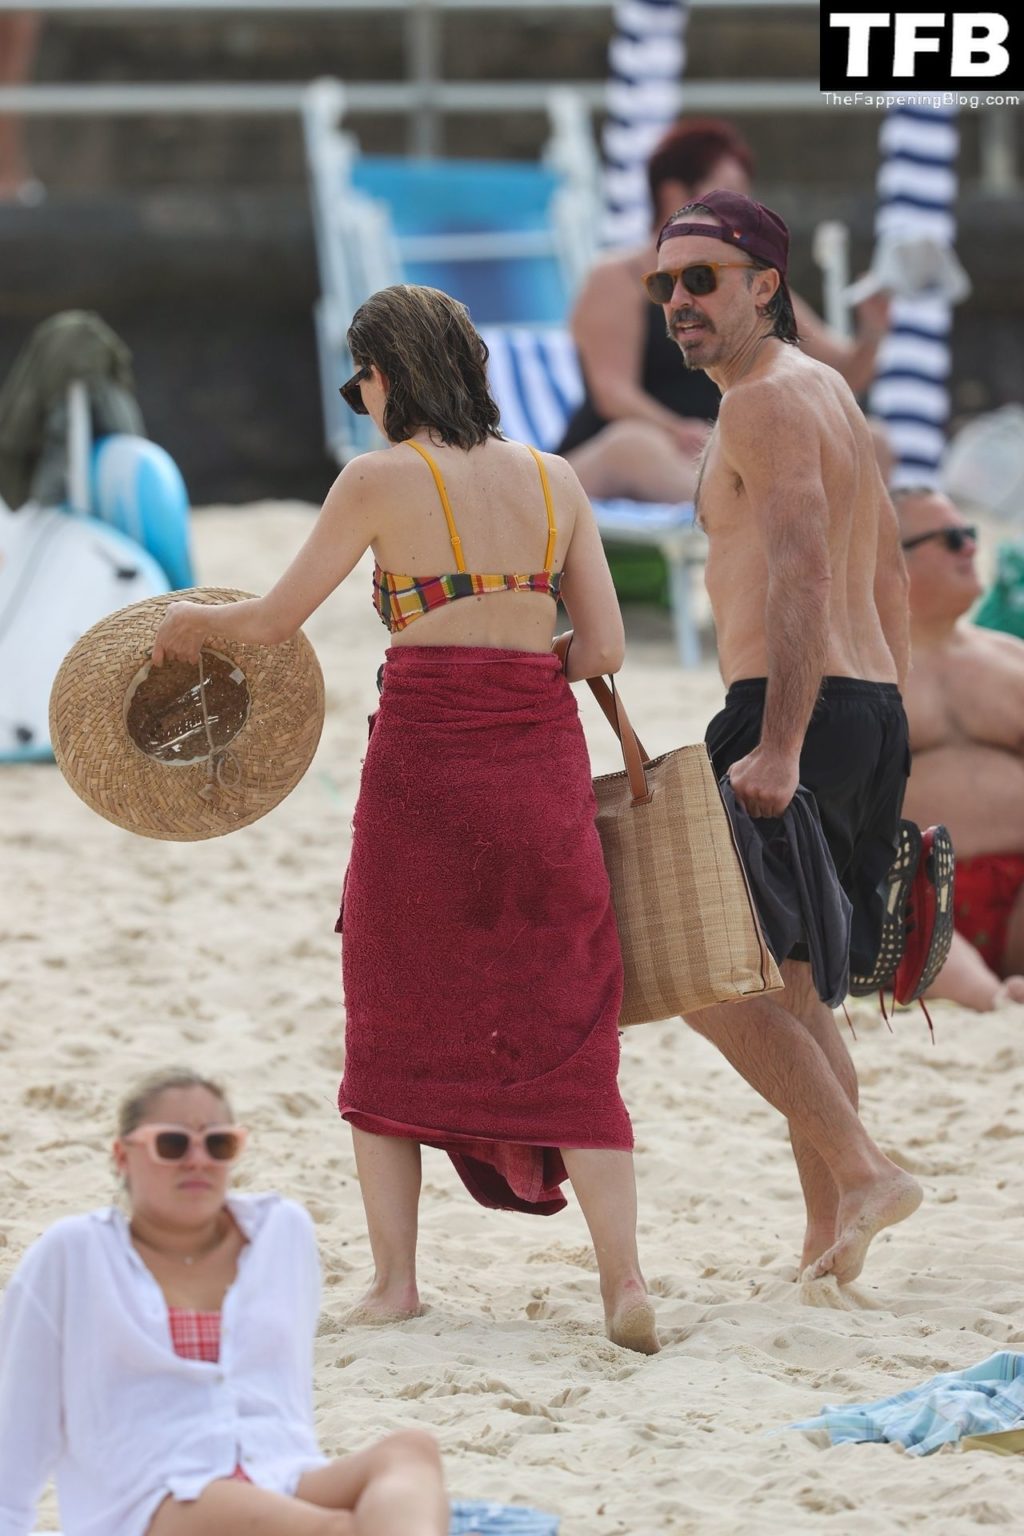 Rose Byrne Sexy The Fappening Blog 86 1024x1536 - Rose Byrne & Kick Gurry Enjoy a Day on the Beach in Sydney (90 Photos)